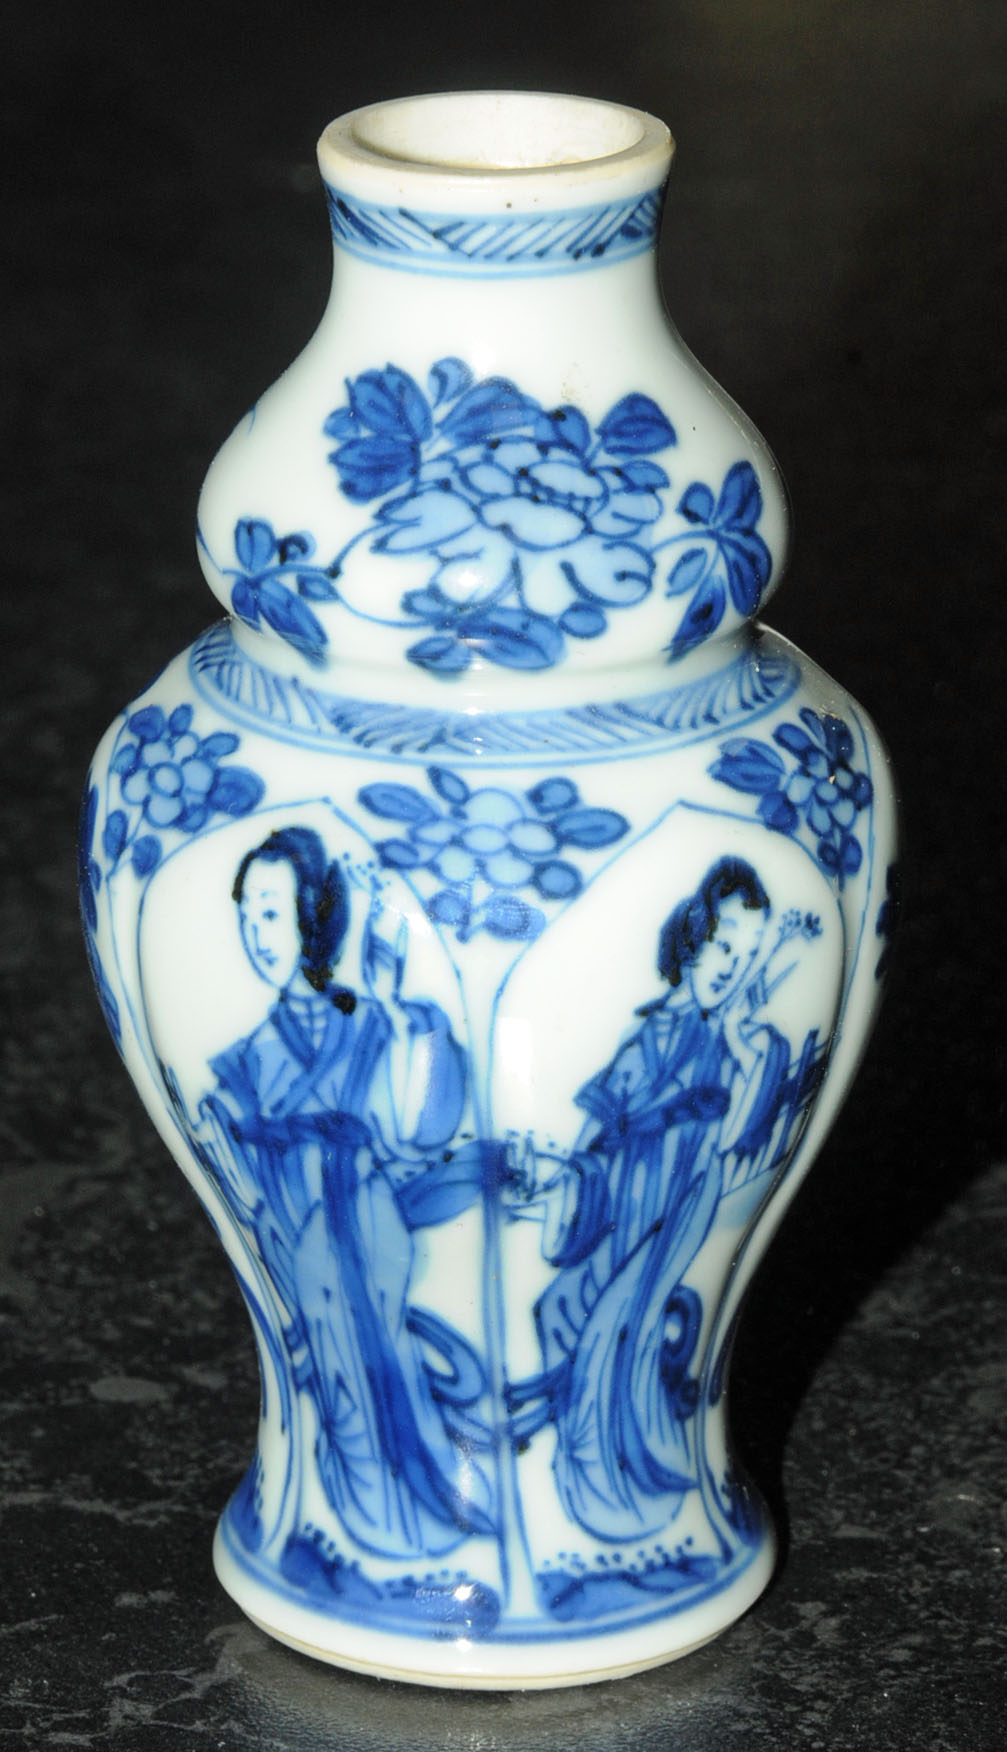 An early 20th century Chinese blue and white porcelain miniature baluster vase with lobbed sides, - Image 4 of 7